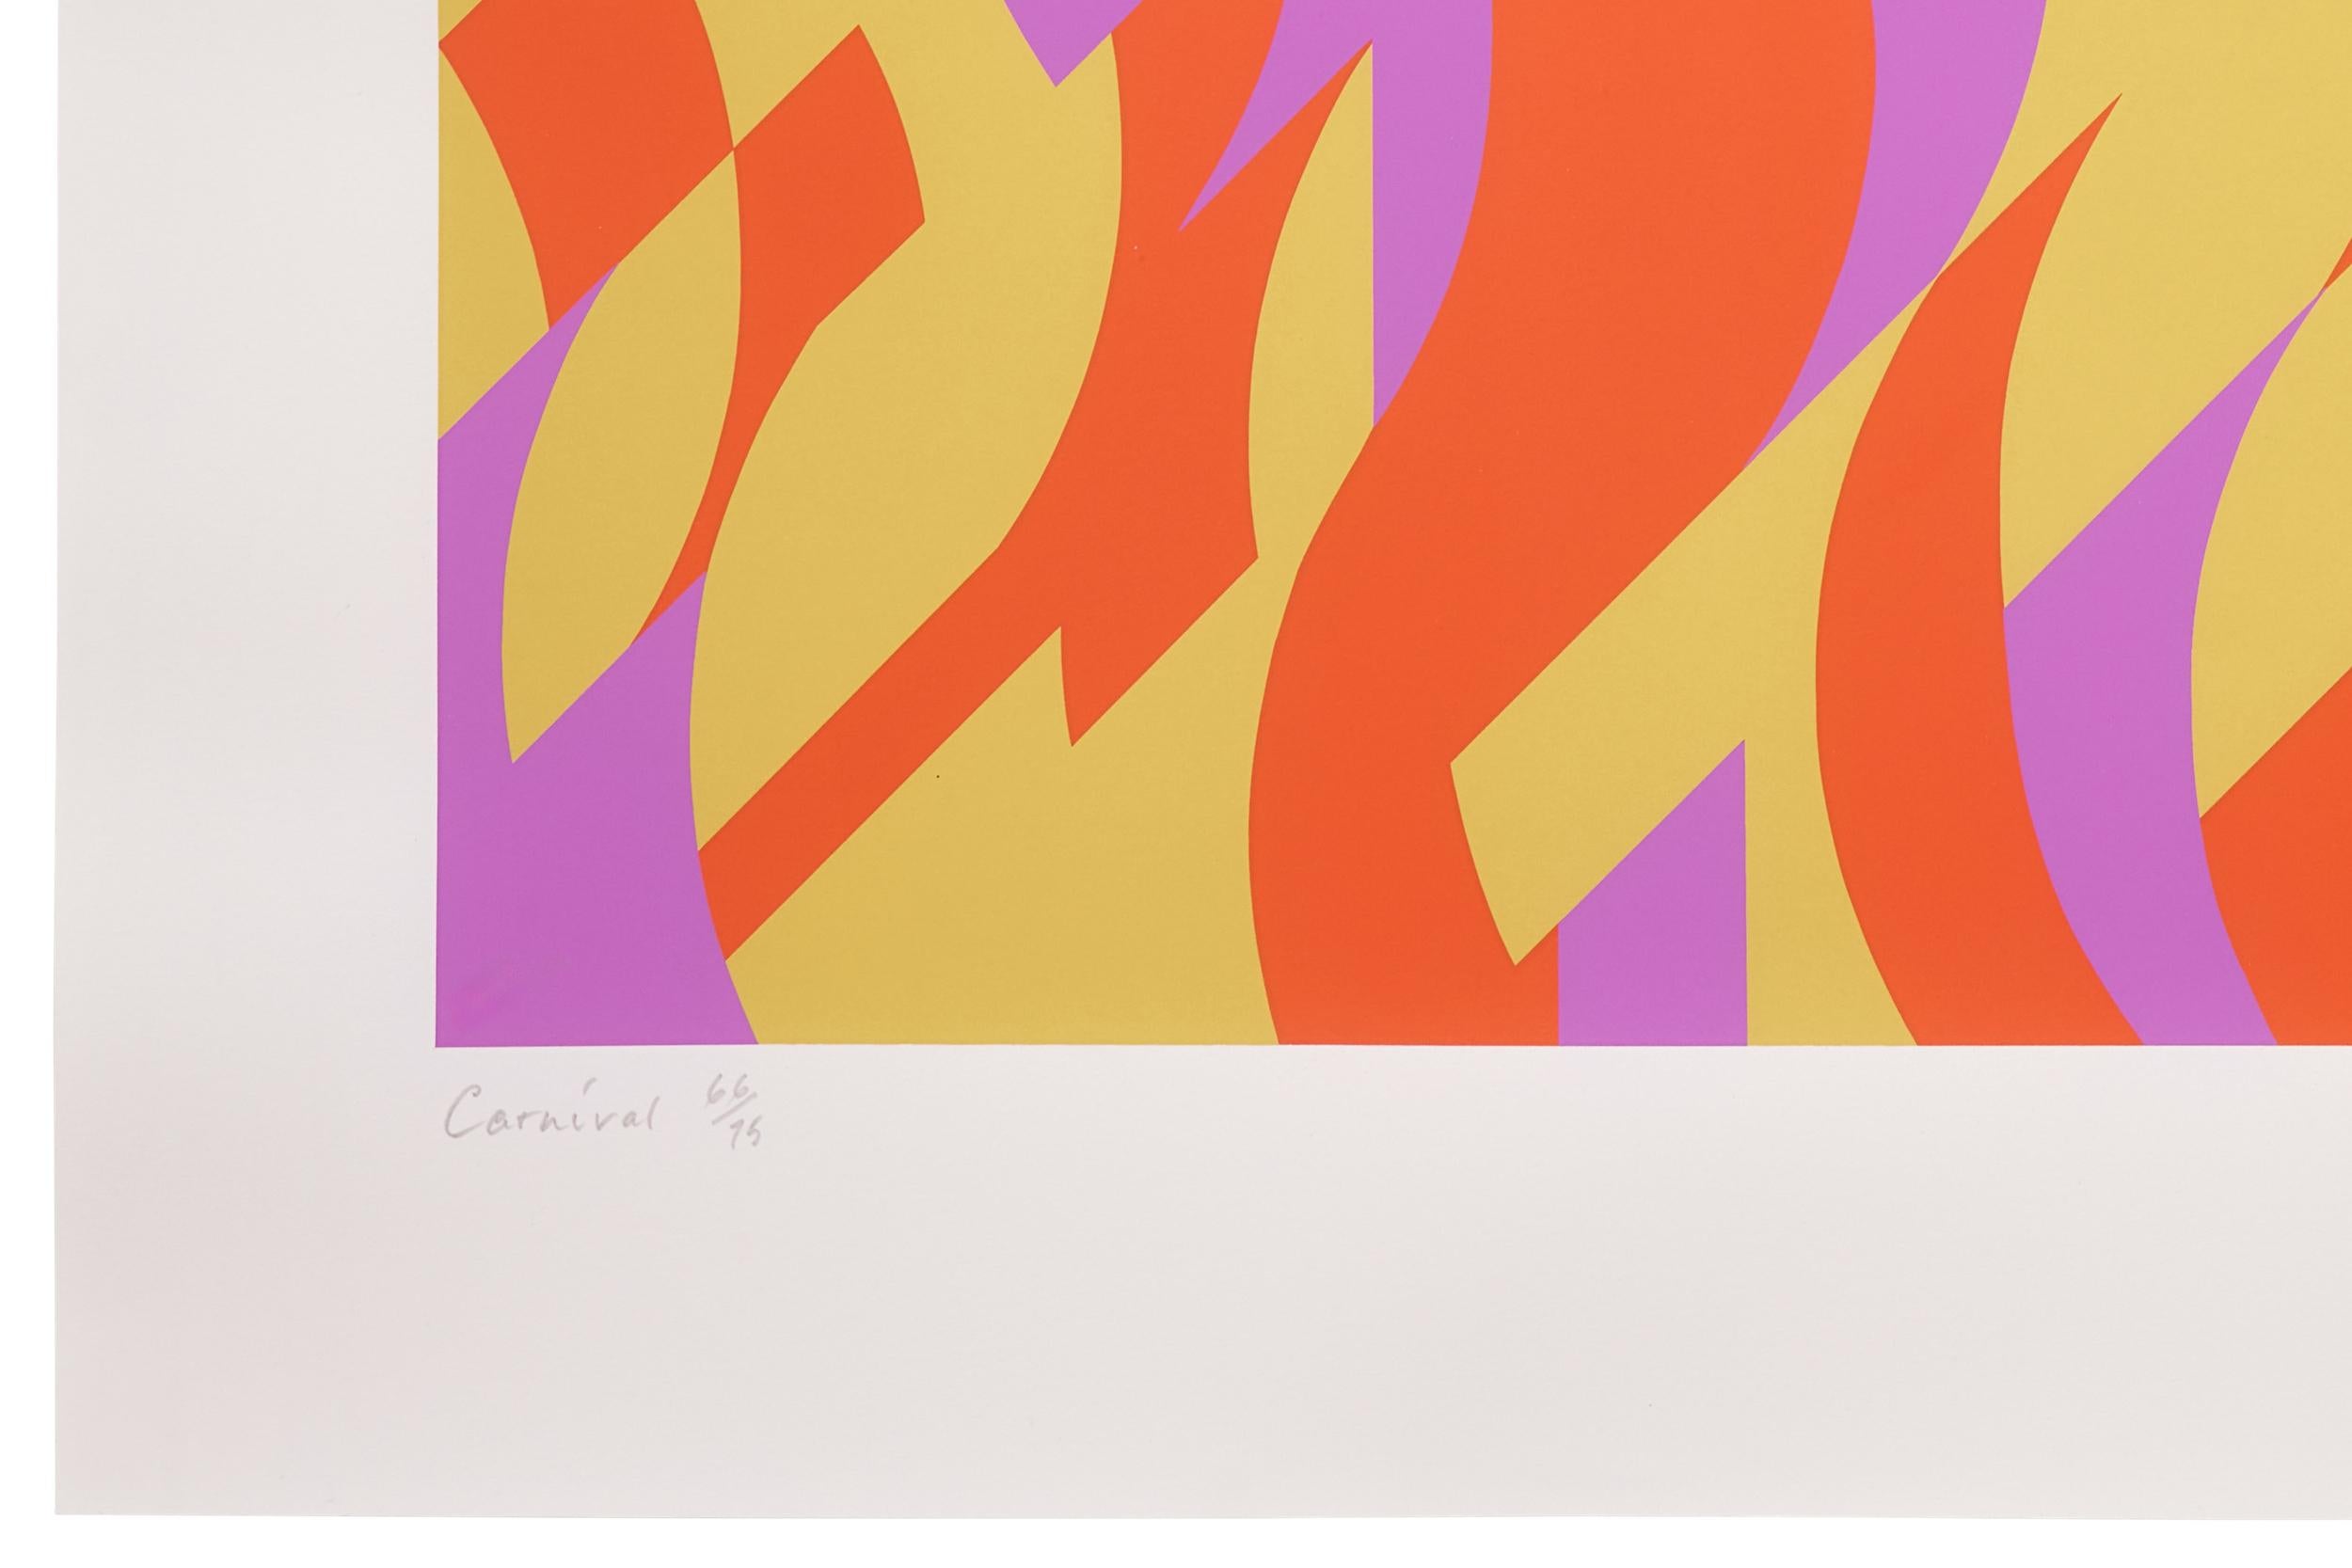 Carnival, 2000
Bridget Riley

Sscreenprint in colours, on wove paper
Signed, dated, titled and numbered from the edition of 75 (plus 10 artist's proof)
Printed and published by Artizan Editions, Hove
Image: 55.7 × 75.9 cm (22 × 29.9 in)
Sheet: 73 ×